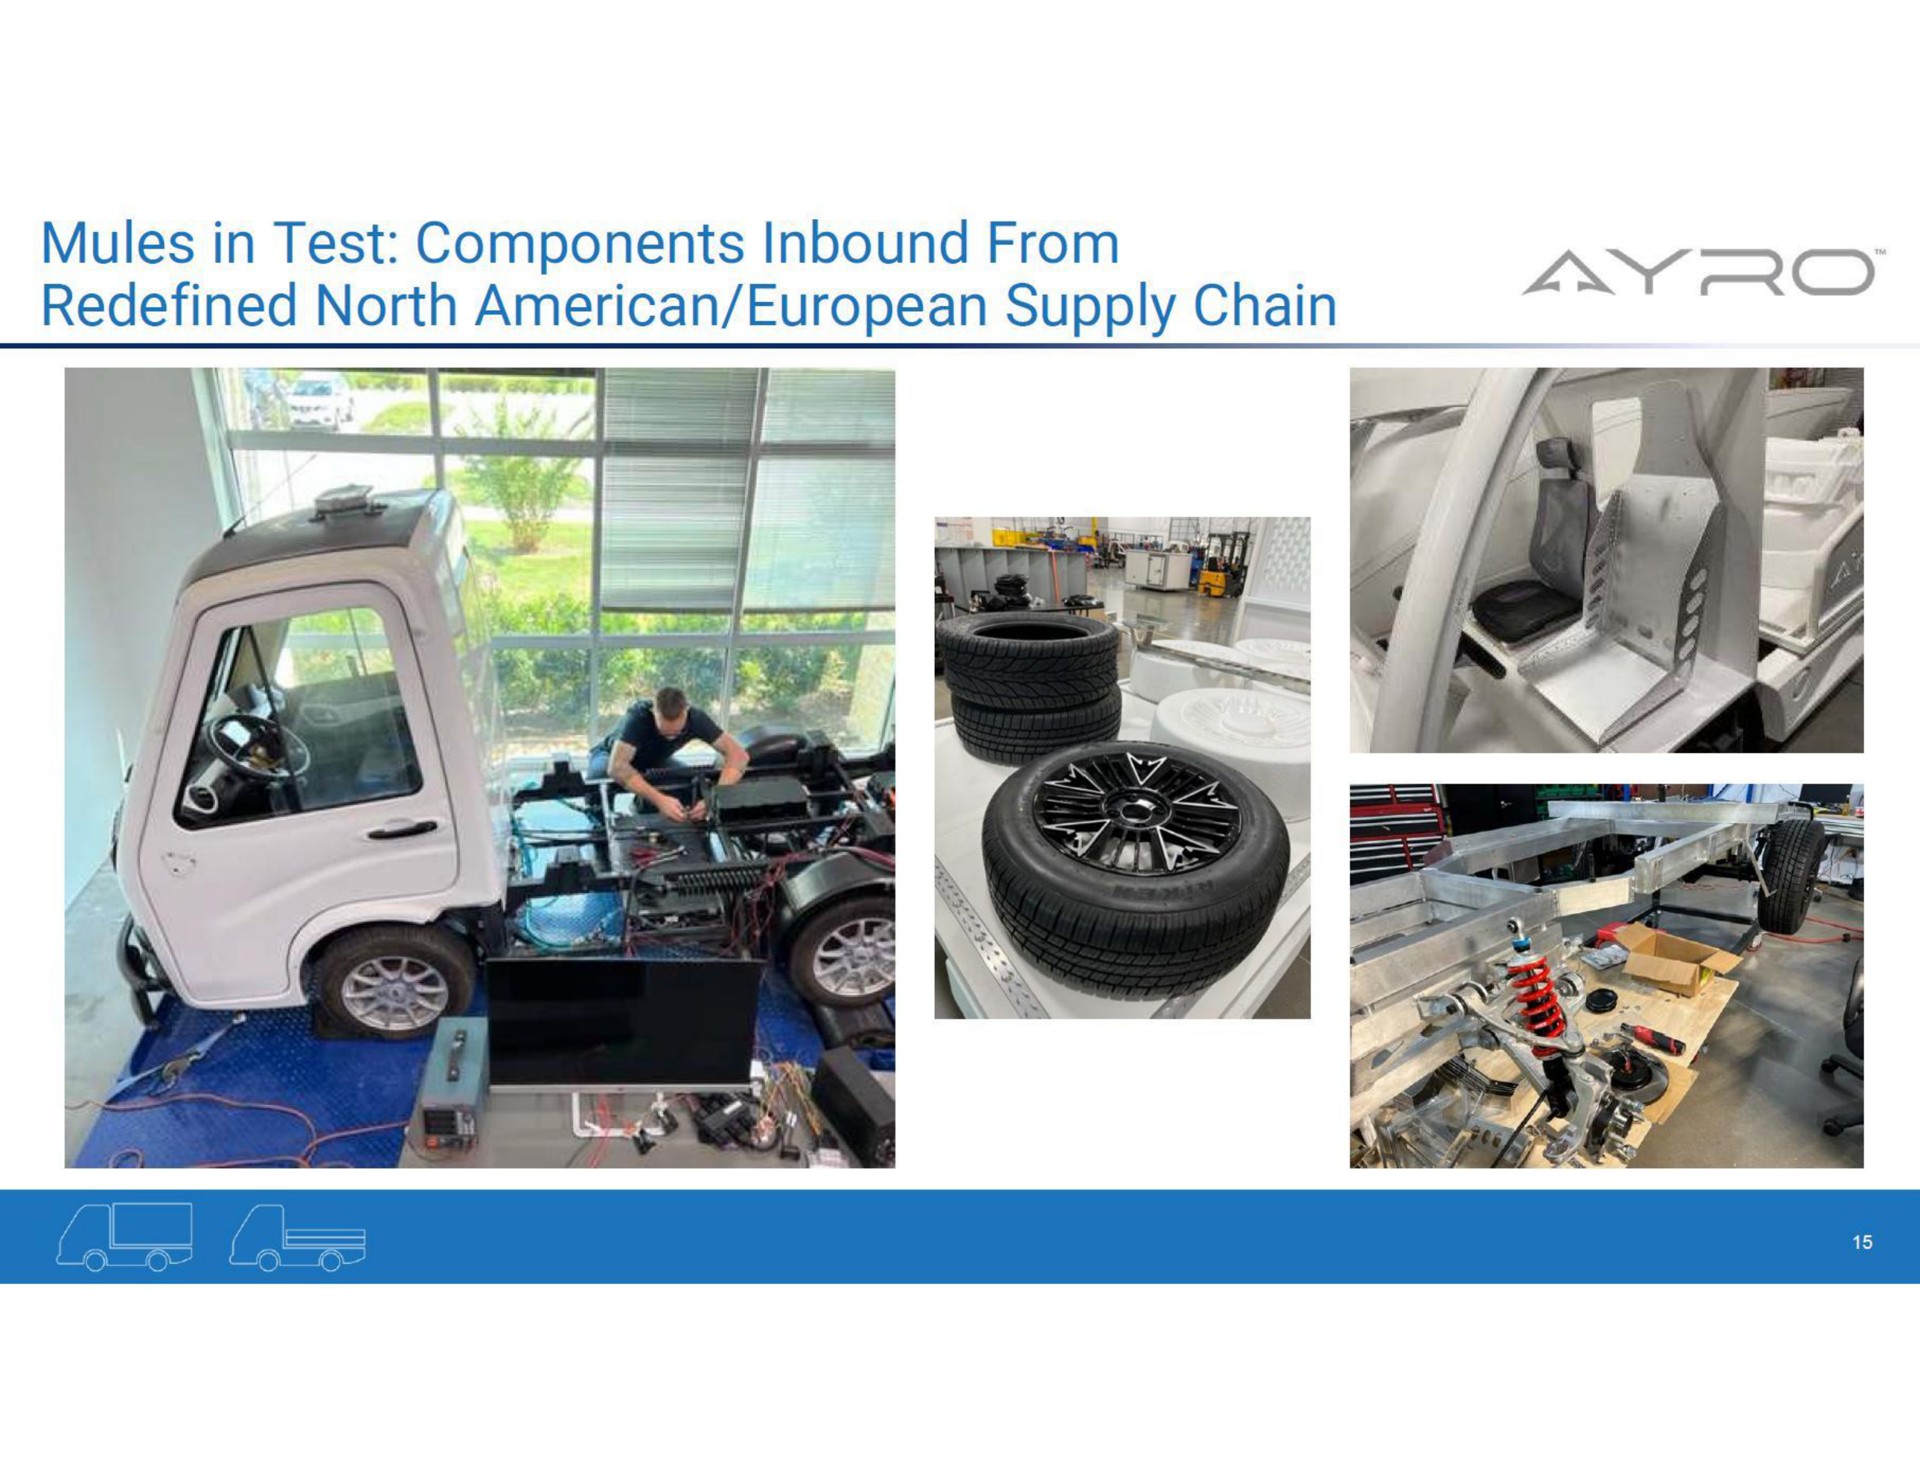 mules in test components inbound from redefined north supply chain | AYRO